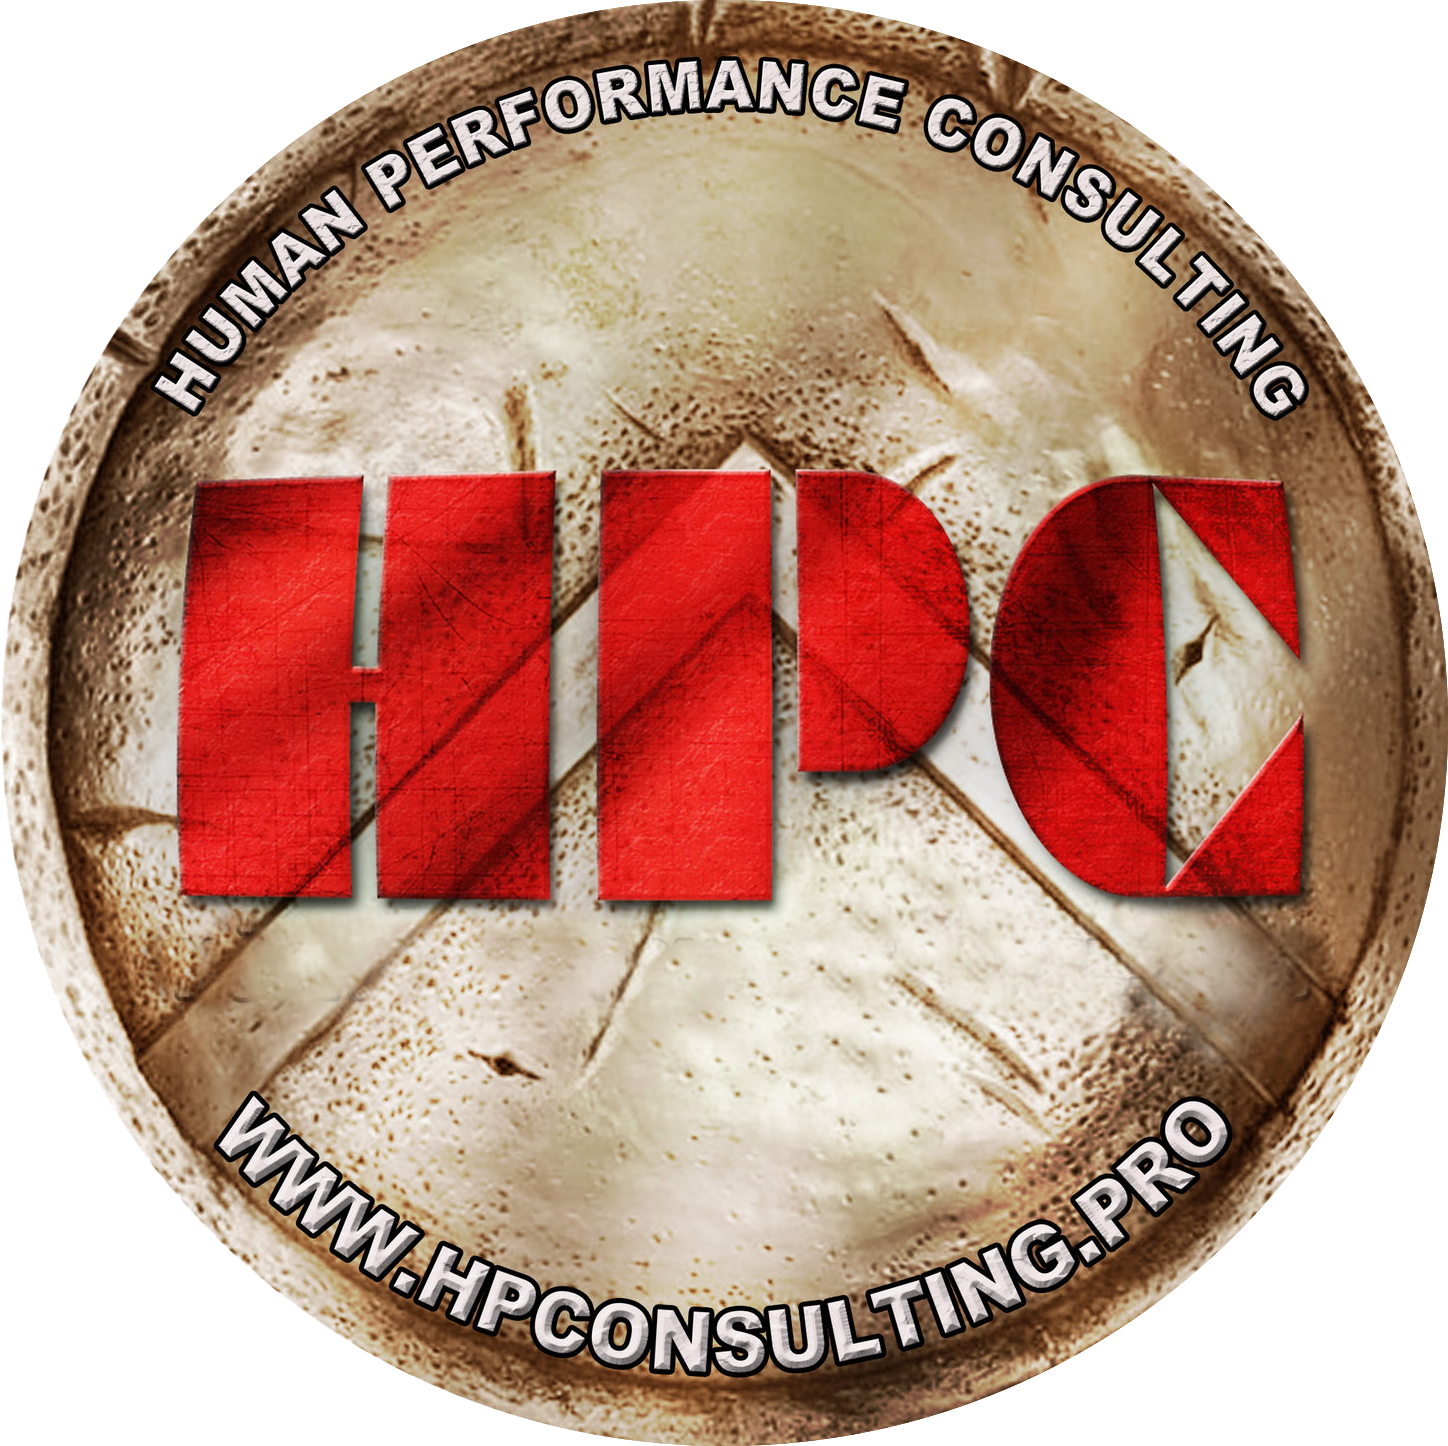 Human Performance Consulting LLC: Home of Mission Based Resilience